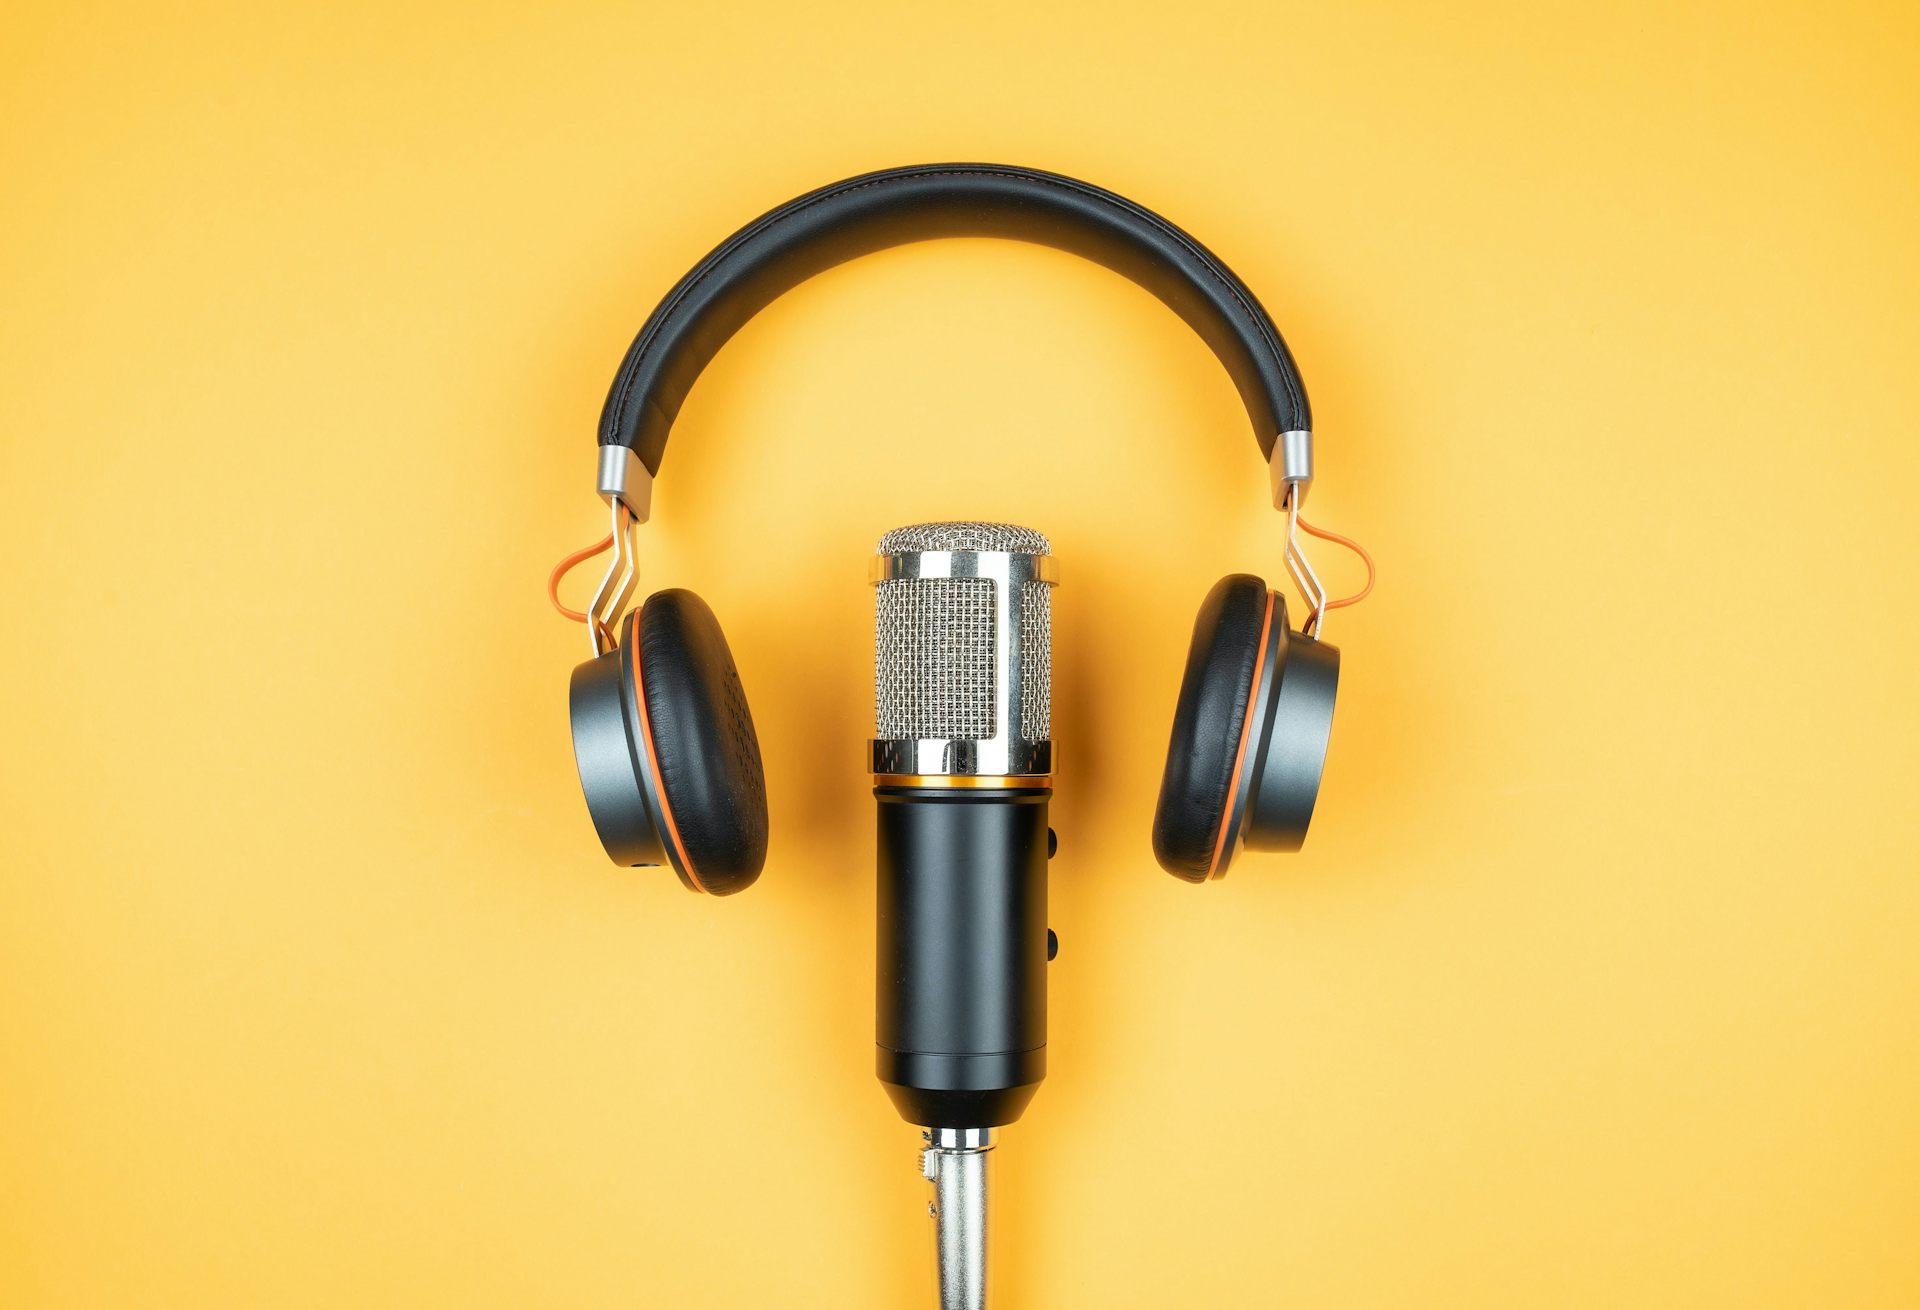 https://www.shutterstock.com/es/image-photo/podcasting-concept-directly-above-view-headphones-1810422307